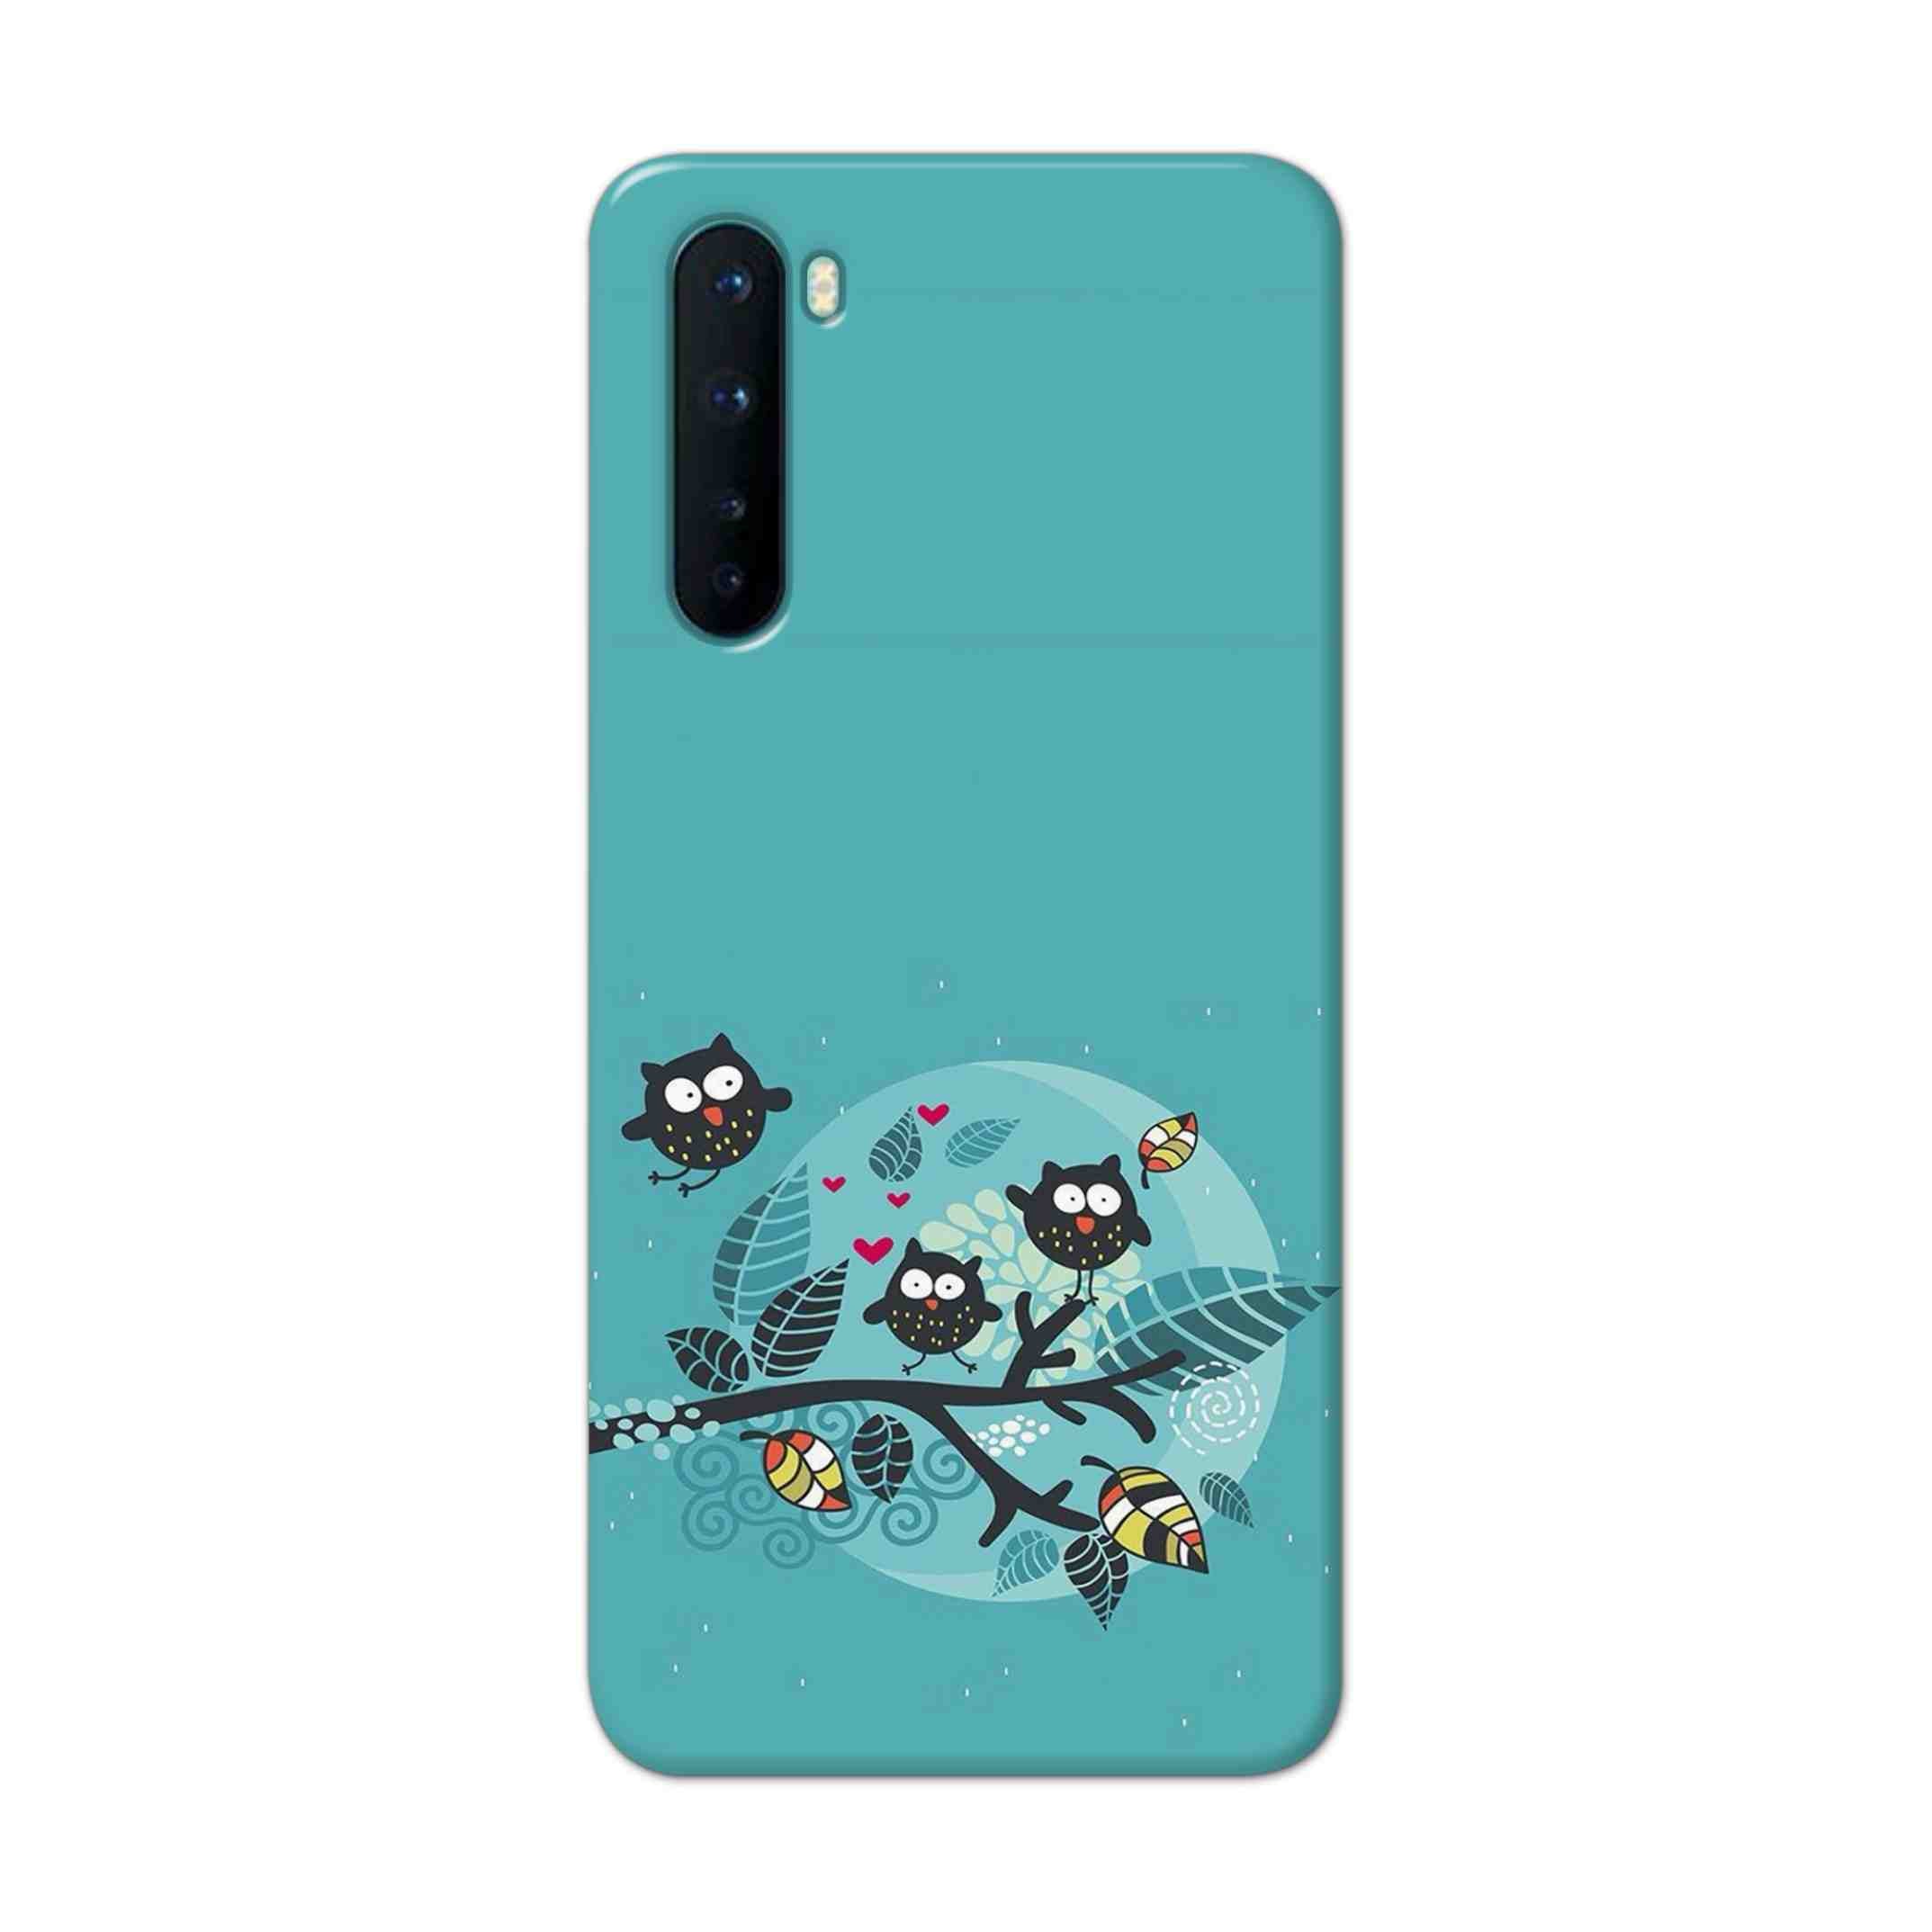 Buy Owl Hard Back Mobile Phone Case Cover For OnePlus Nord Online